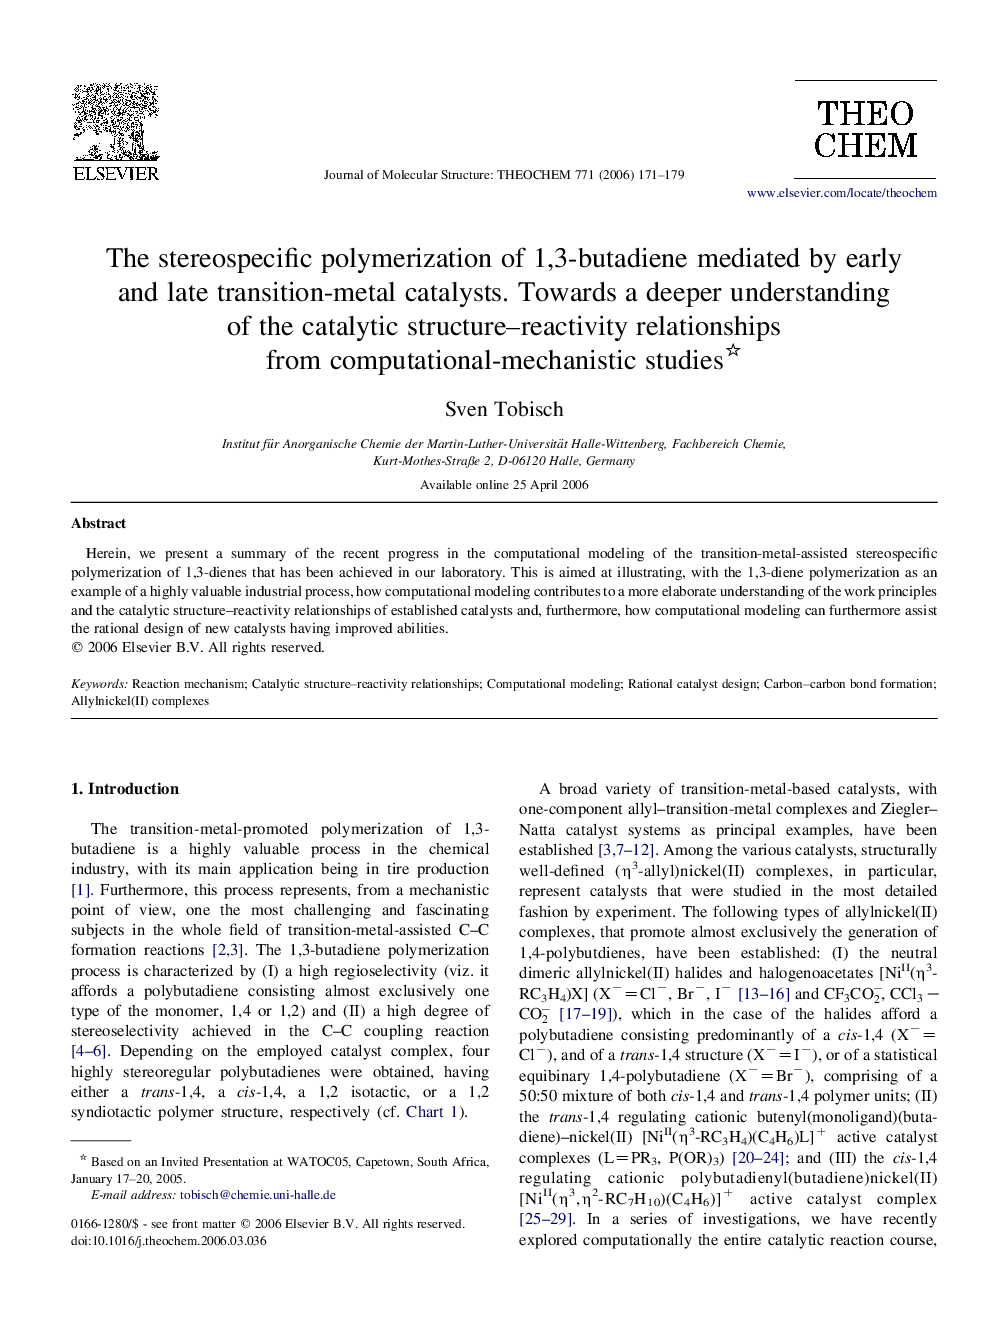 The stereospecific polymerization of 1,3-butadiene mediated by early and late transition-metal catalysts. Towards a deeper understanding of the catalytic structure-reactivity relationships from computational-mechanistic studies